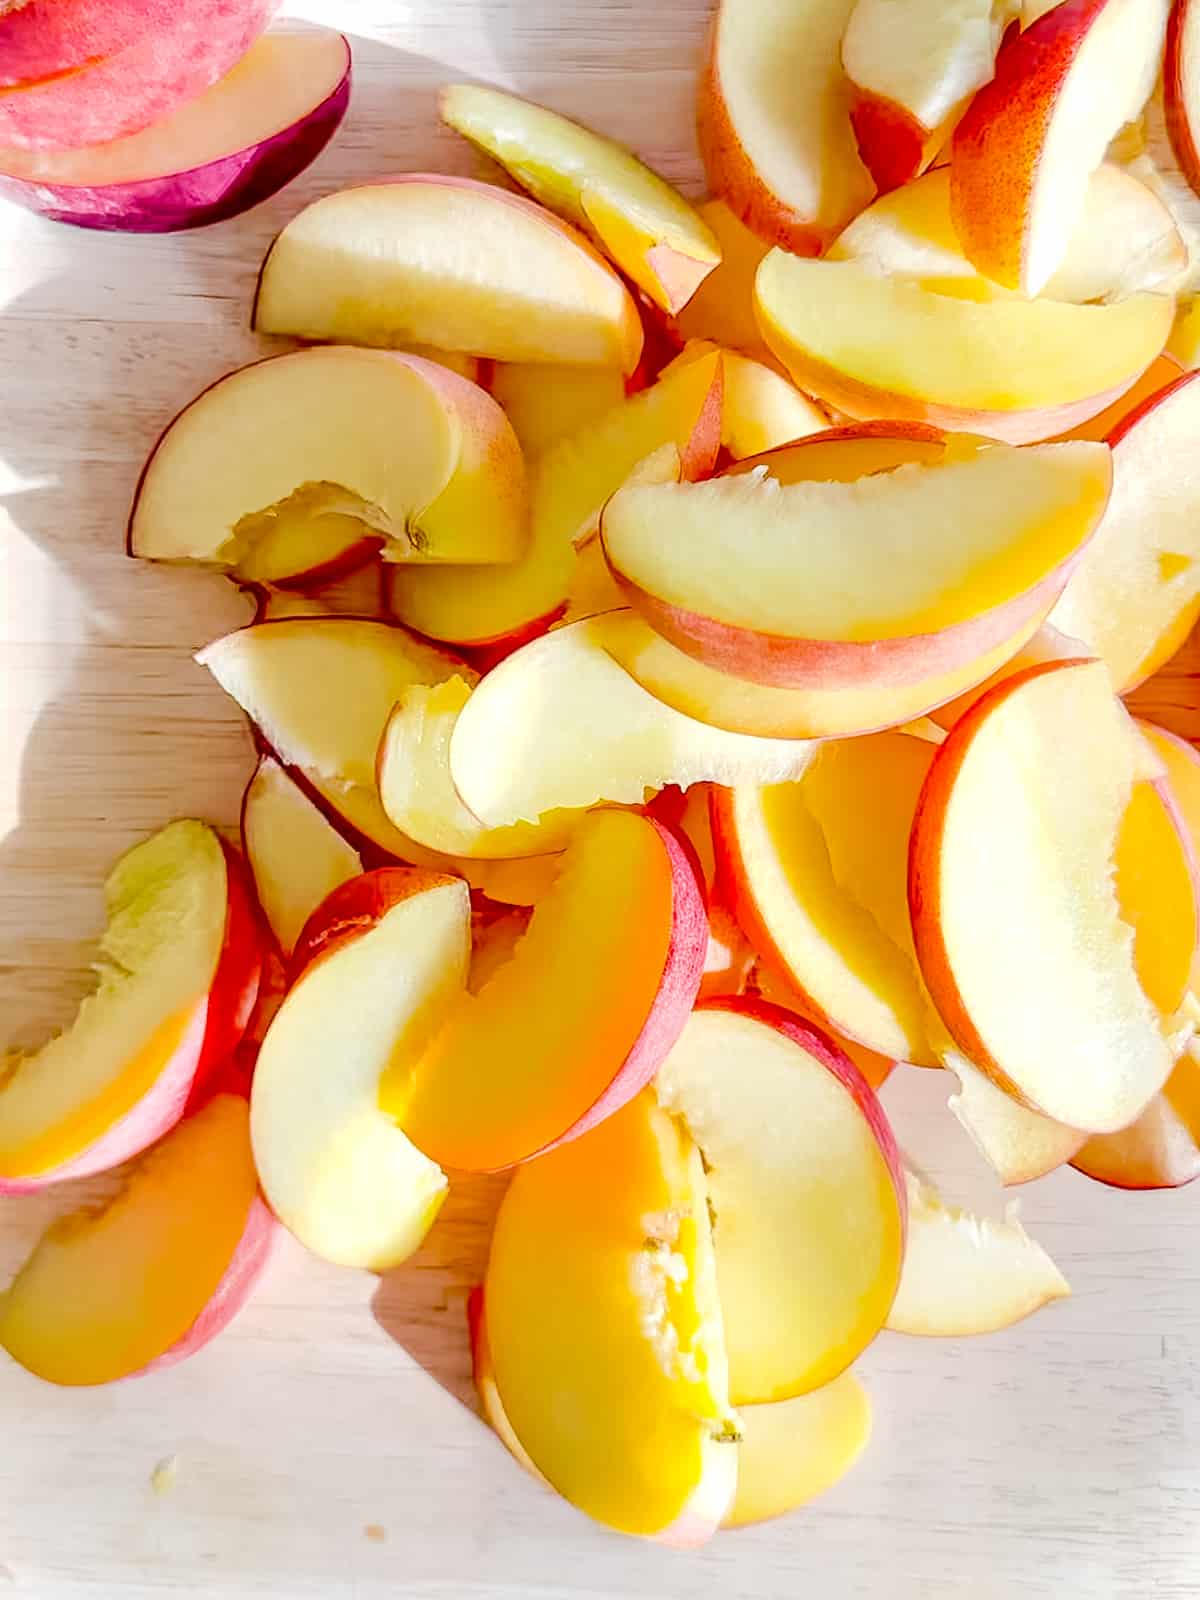 Sliced peaches on wooden cutting board.